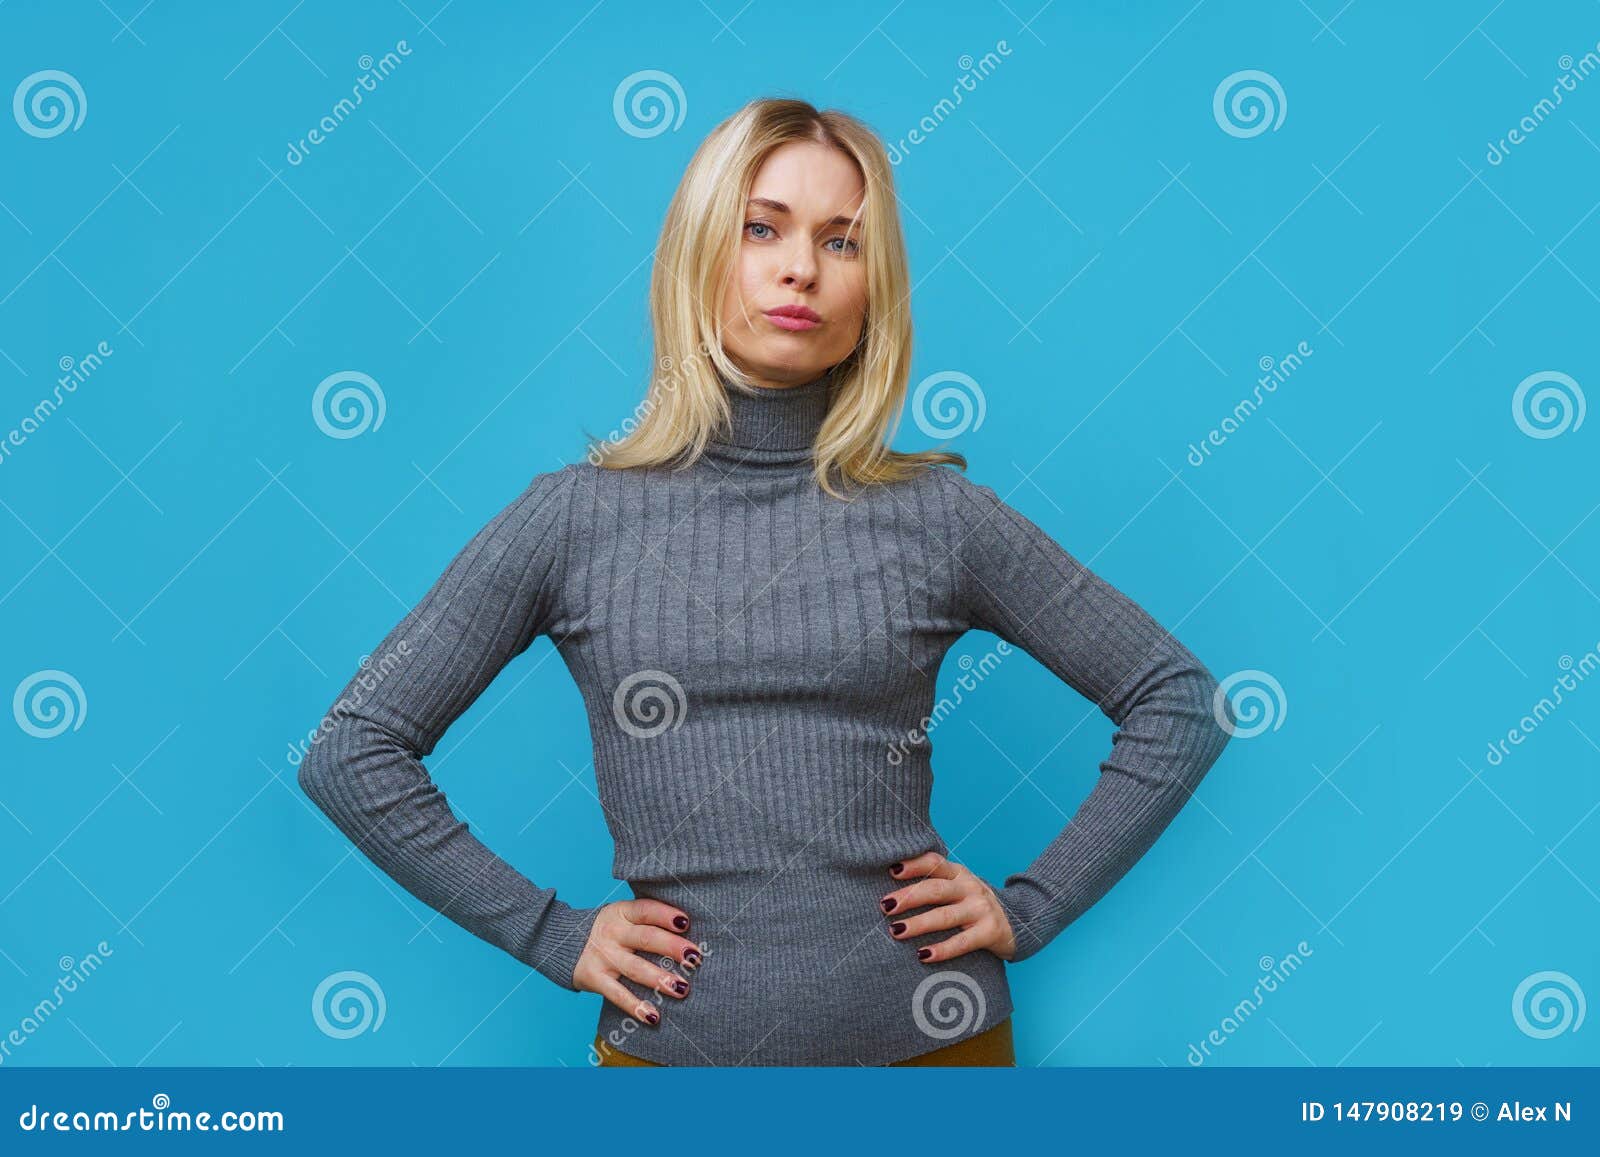 Serious Blonde Woman with Hair in Bun - wide 4